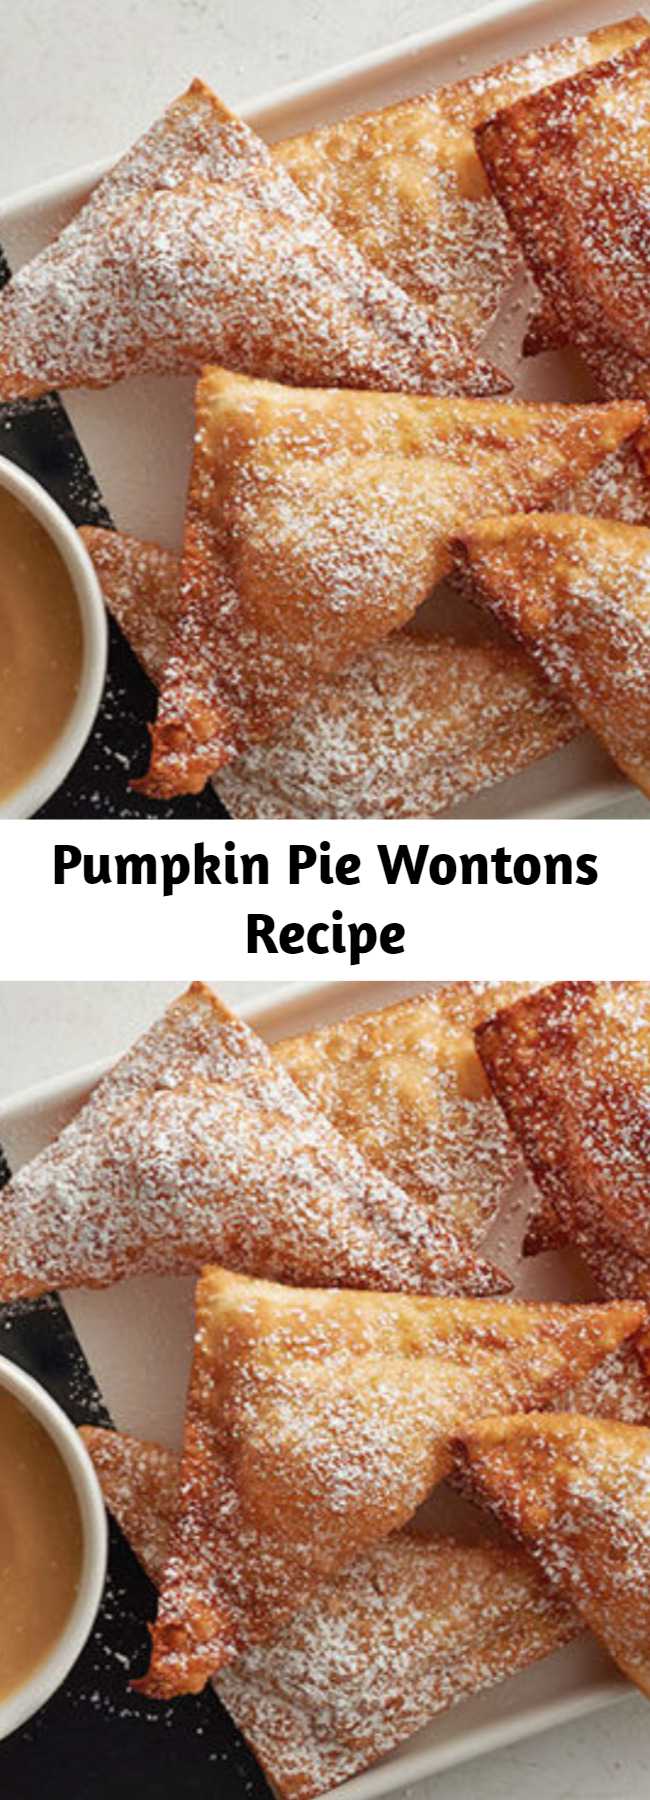 Pumpkin Pie Wontons Recipe - Magical pumpkin pie-flavored deep-fried goodness with a creamy maple dip on the side.